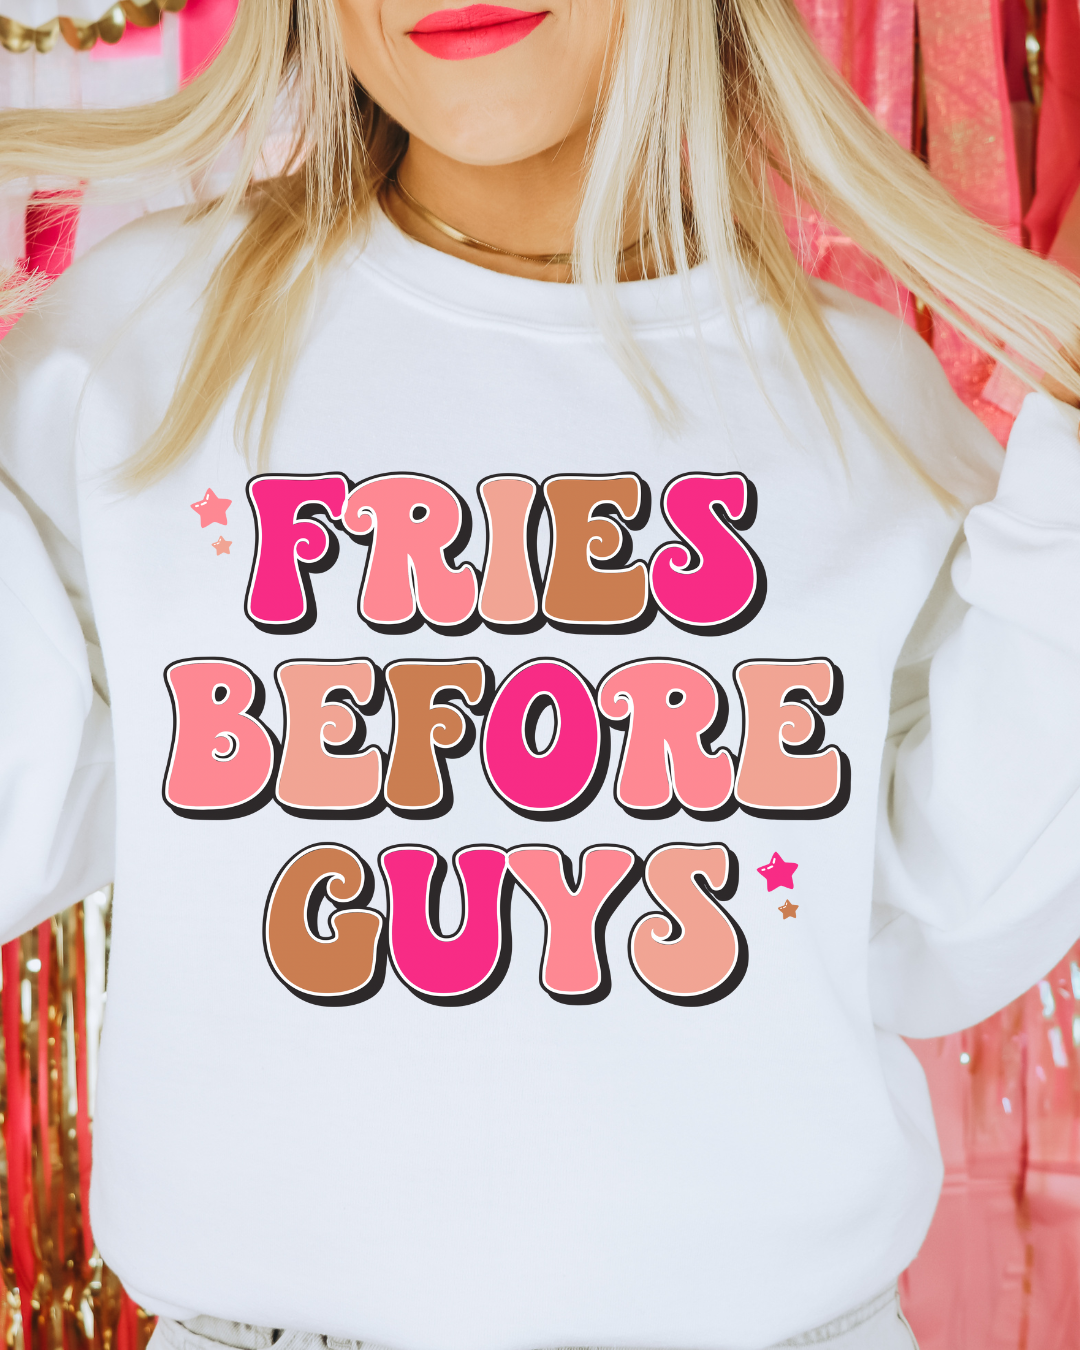 Colorful Fries Before Guys Valentines Adult Crewneck Pullover